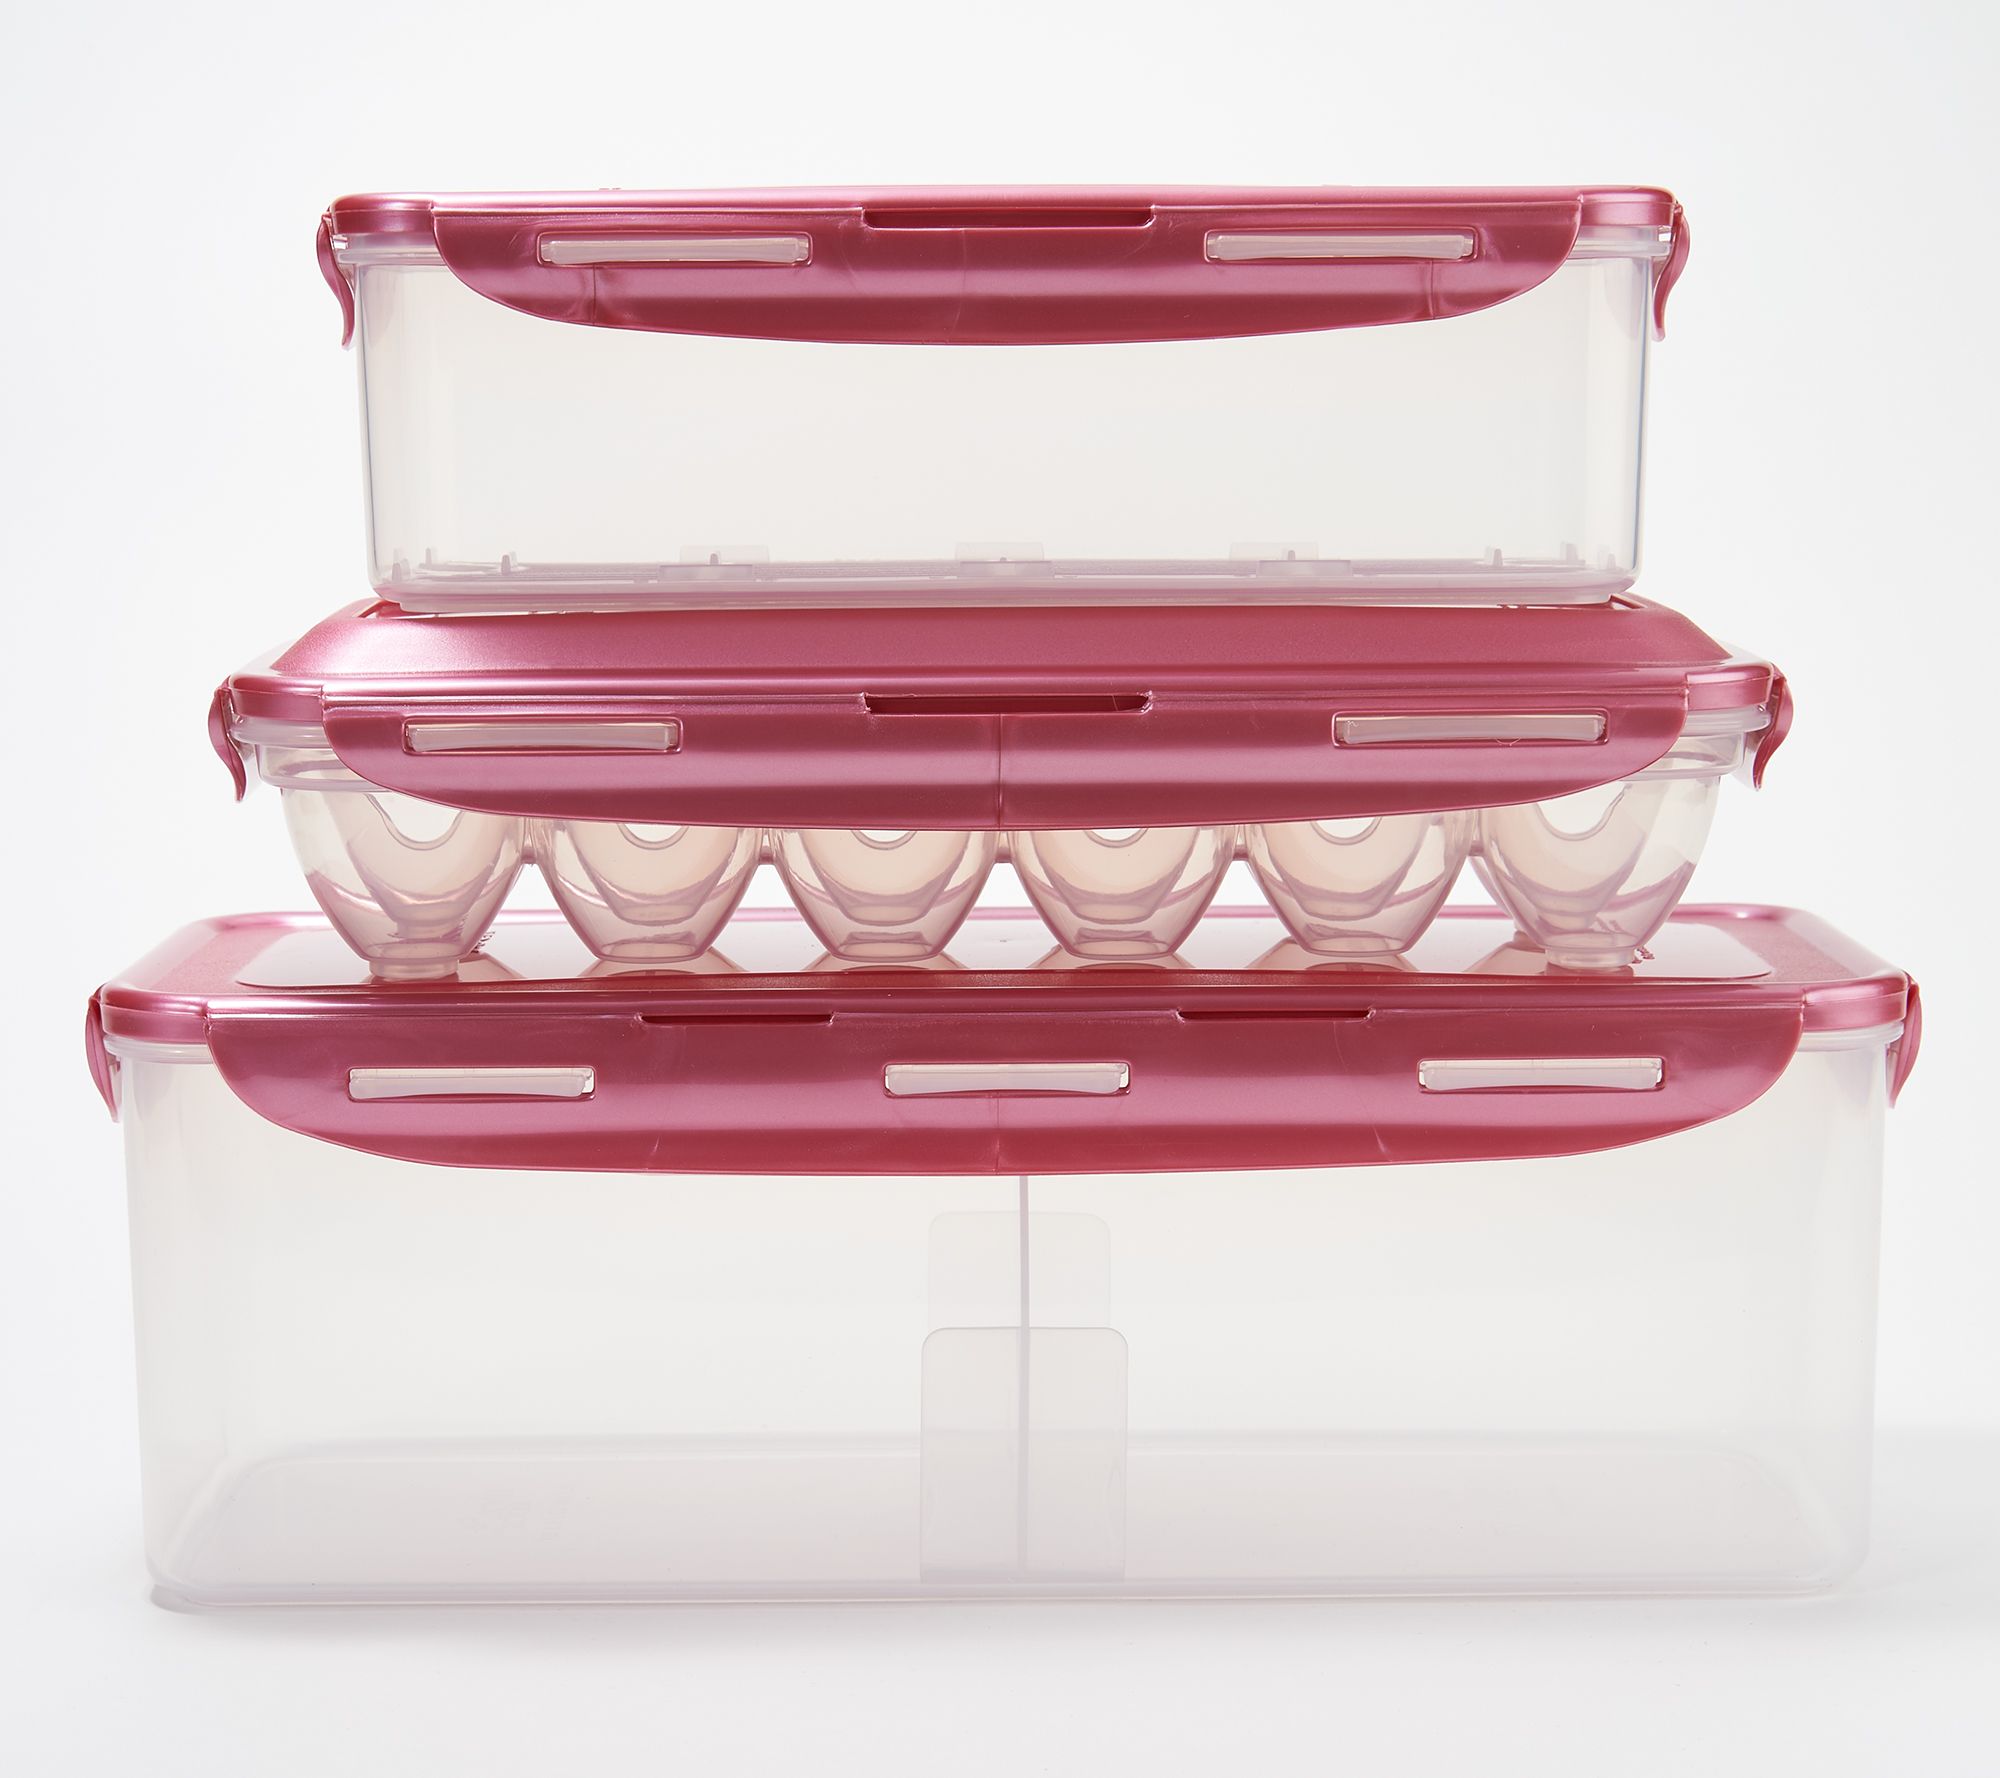 Easylock Microwavable Glass Food Containers With Dividers